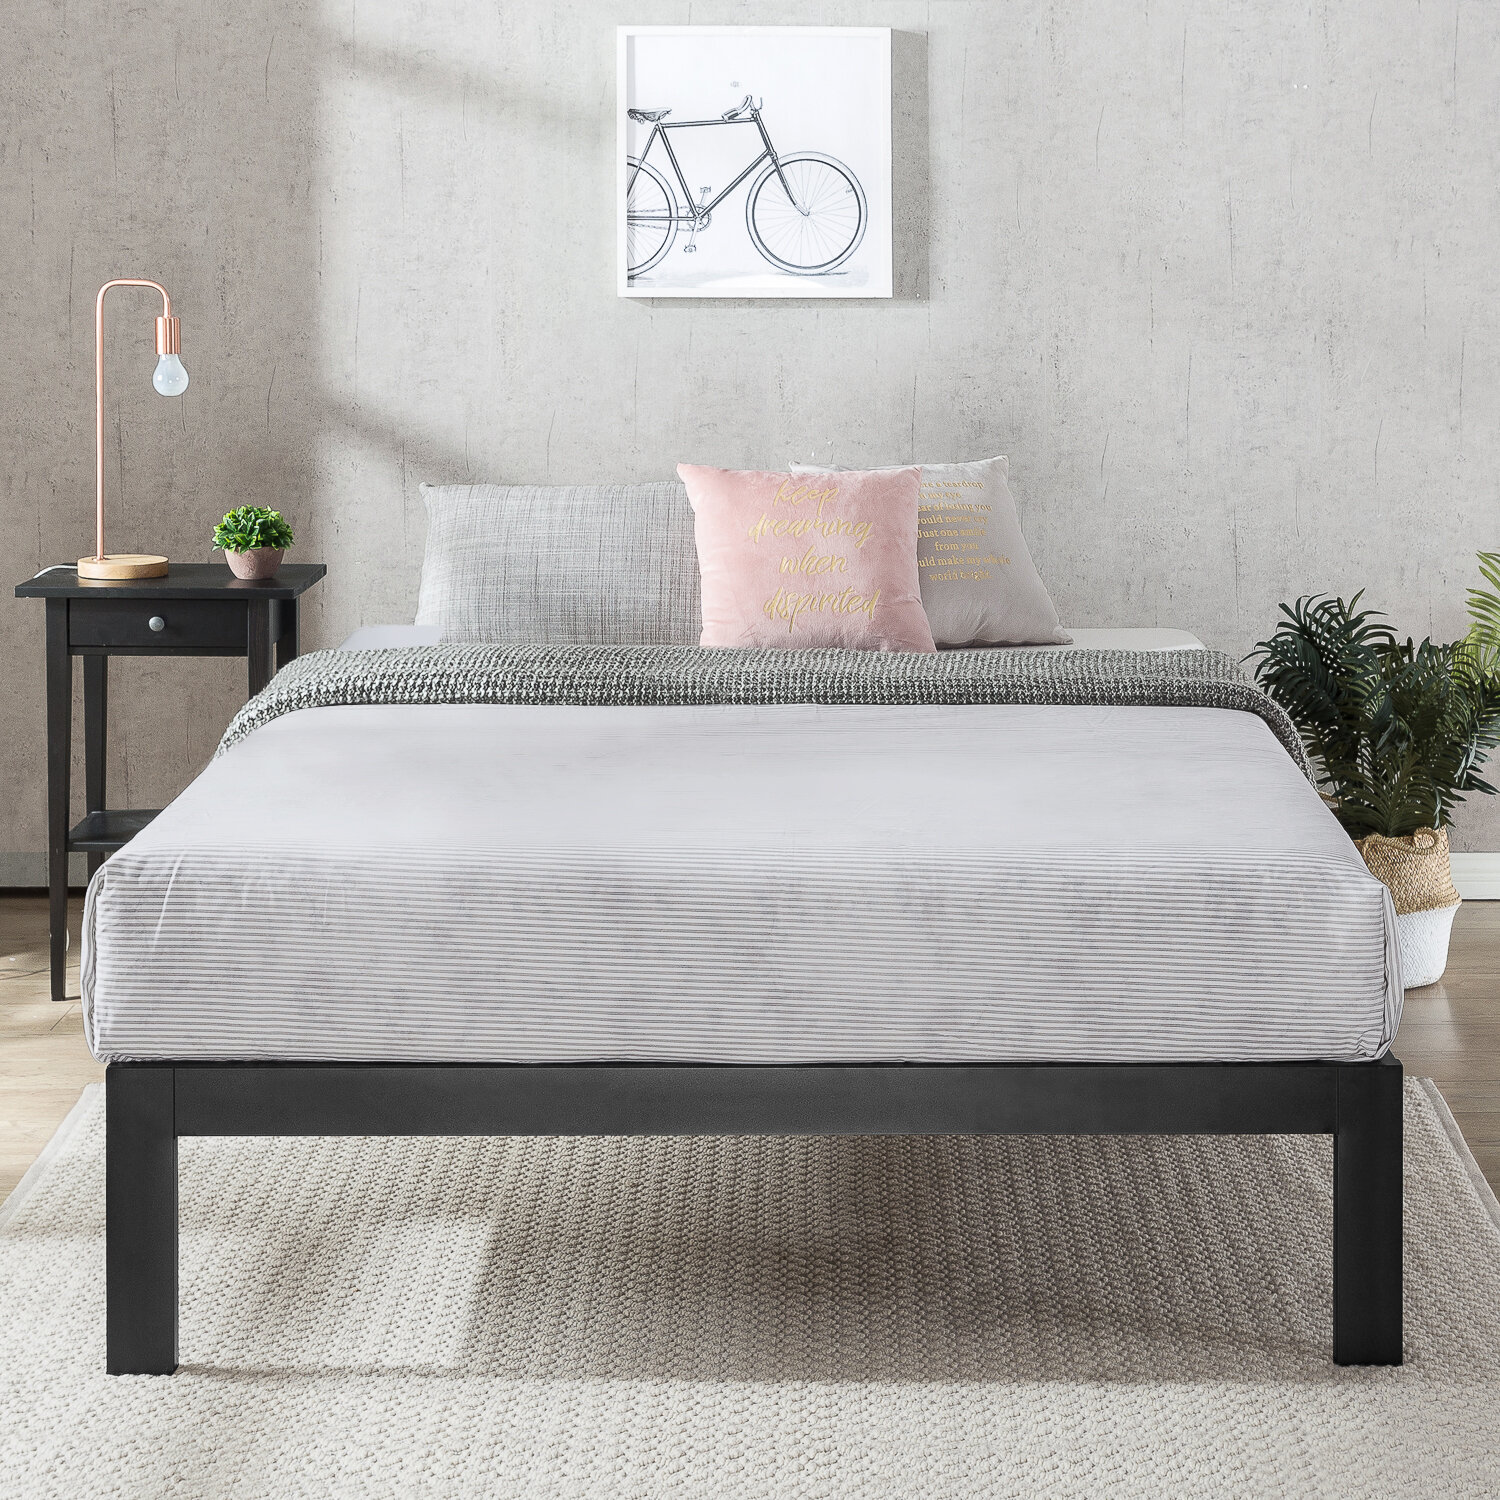 Details about   New Upholstered Low Profile Standard Bed frame black Heavy Weight Capacity 